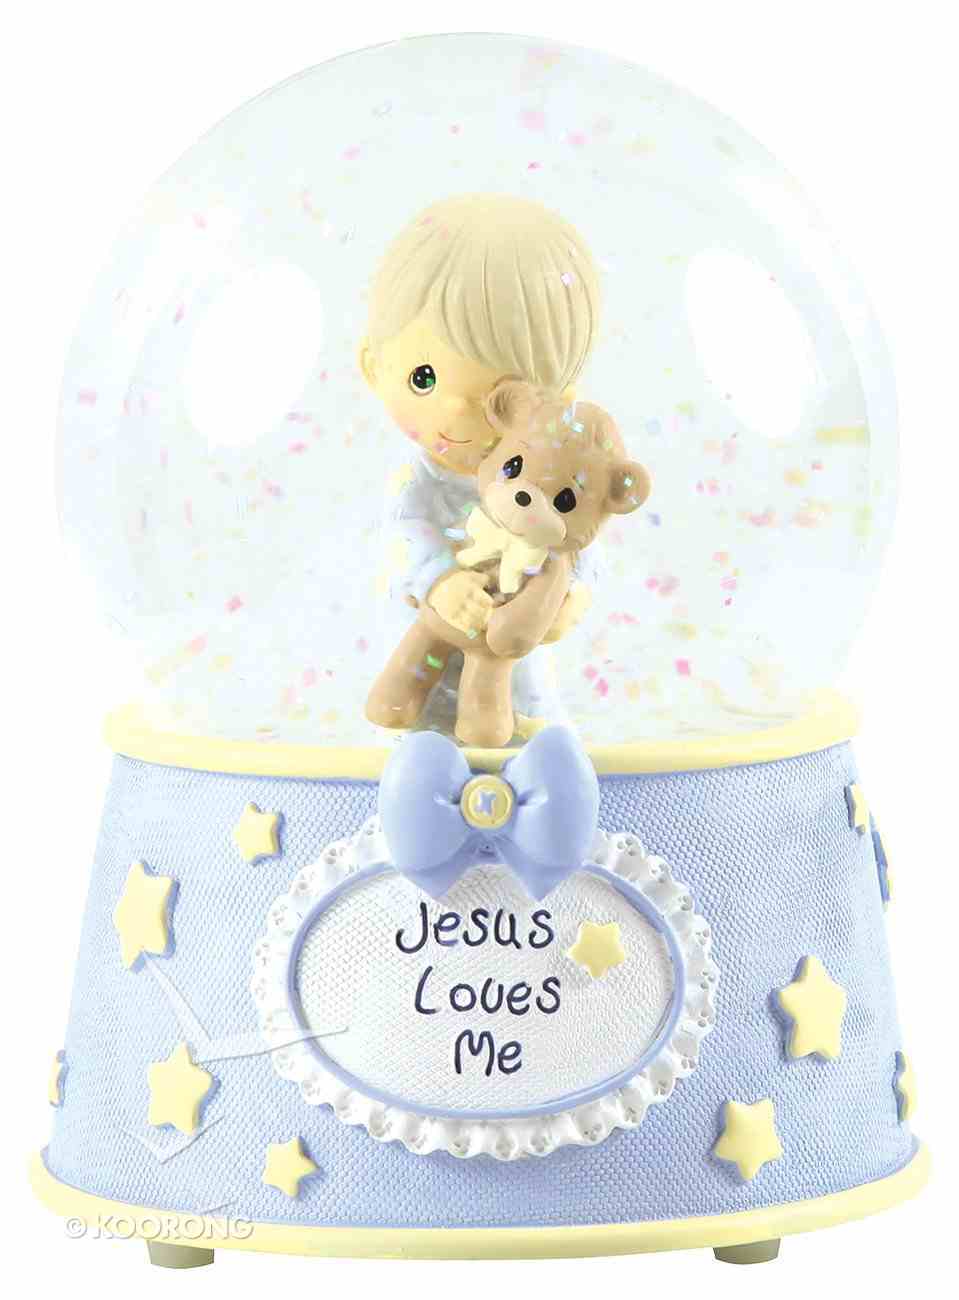 Precious Moments Figurine: Baby Boy With Teddy, Jesus Loves Me Musical Water Globe Homeware